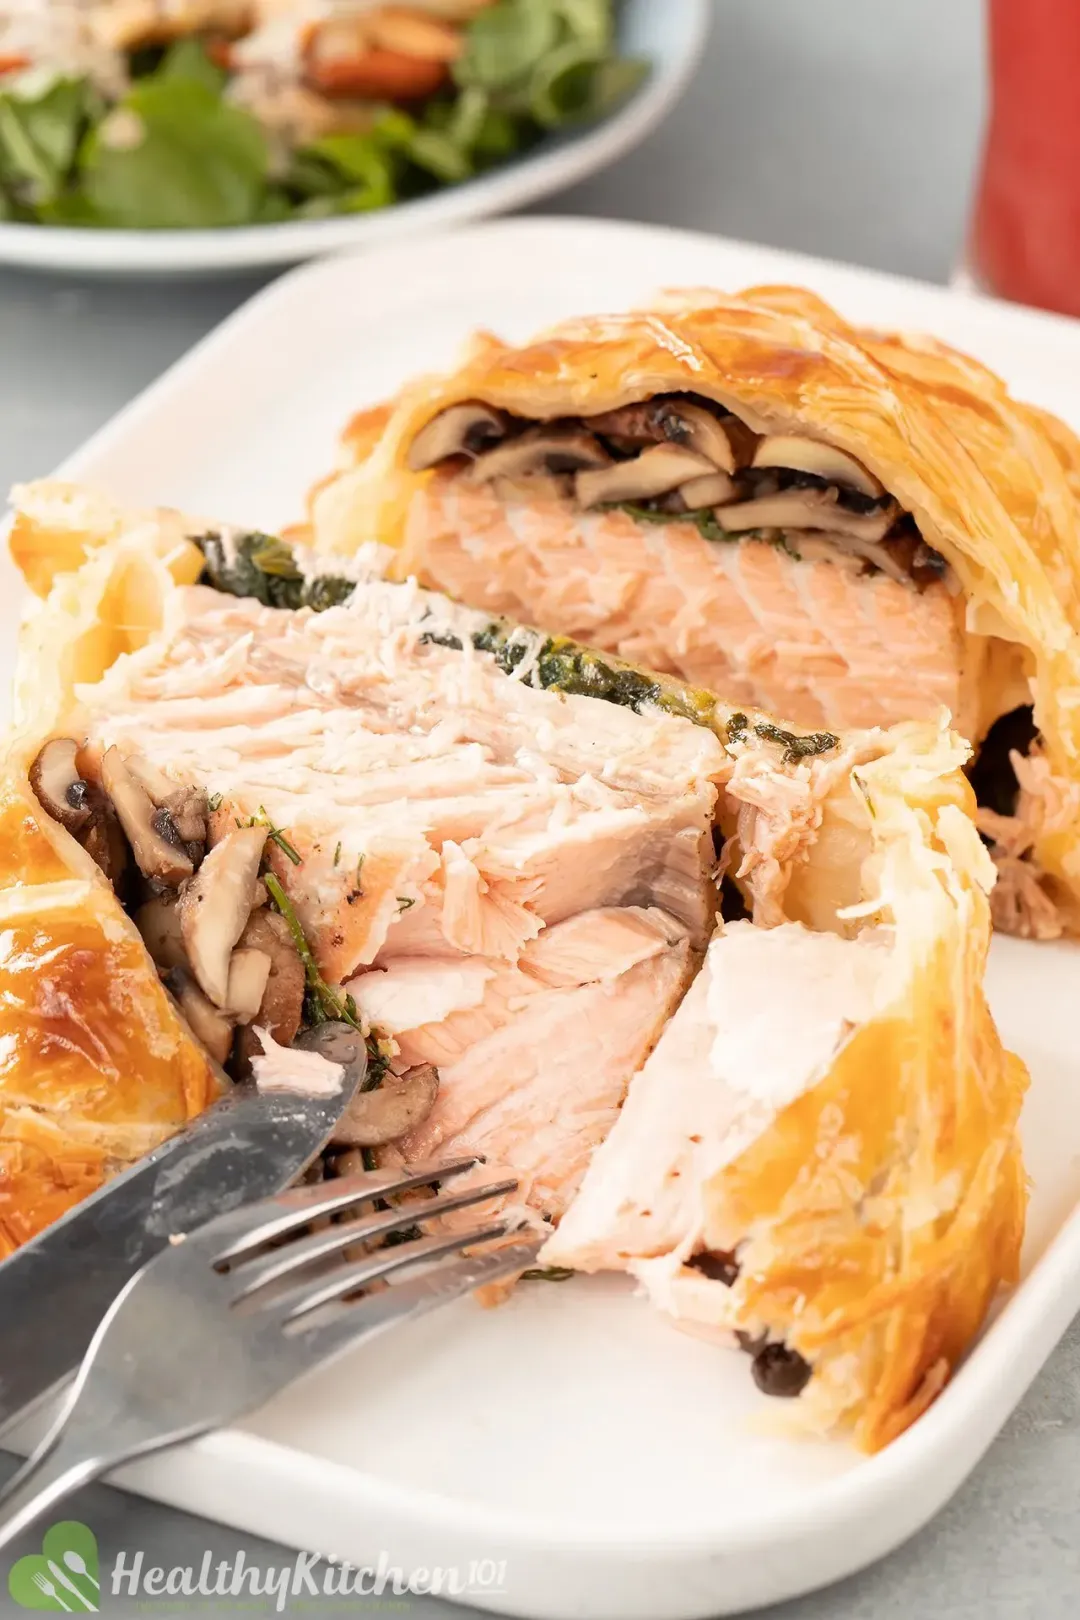 A plate containing salmon en croute sliced open revealing cooked salmon layered with cooked mushroom covered in golden cooked puff pastry